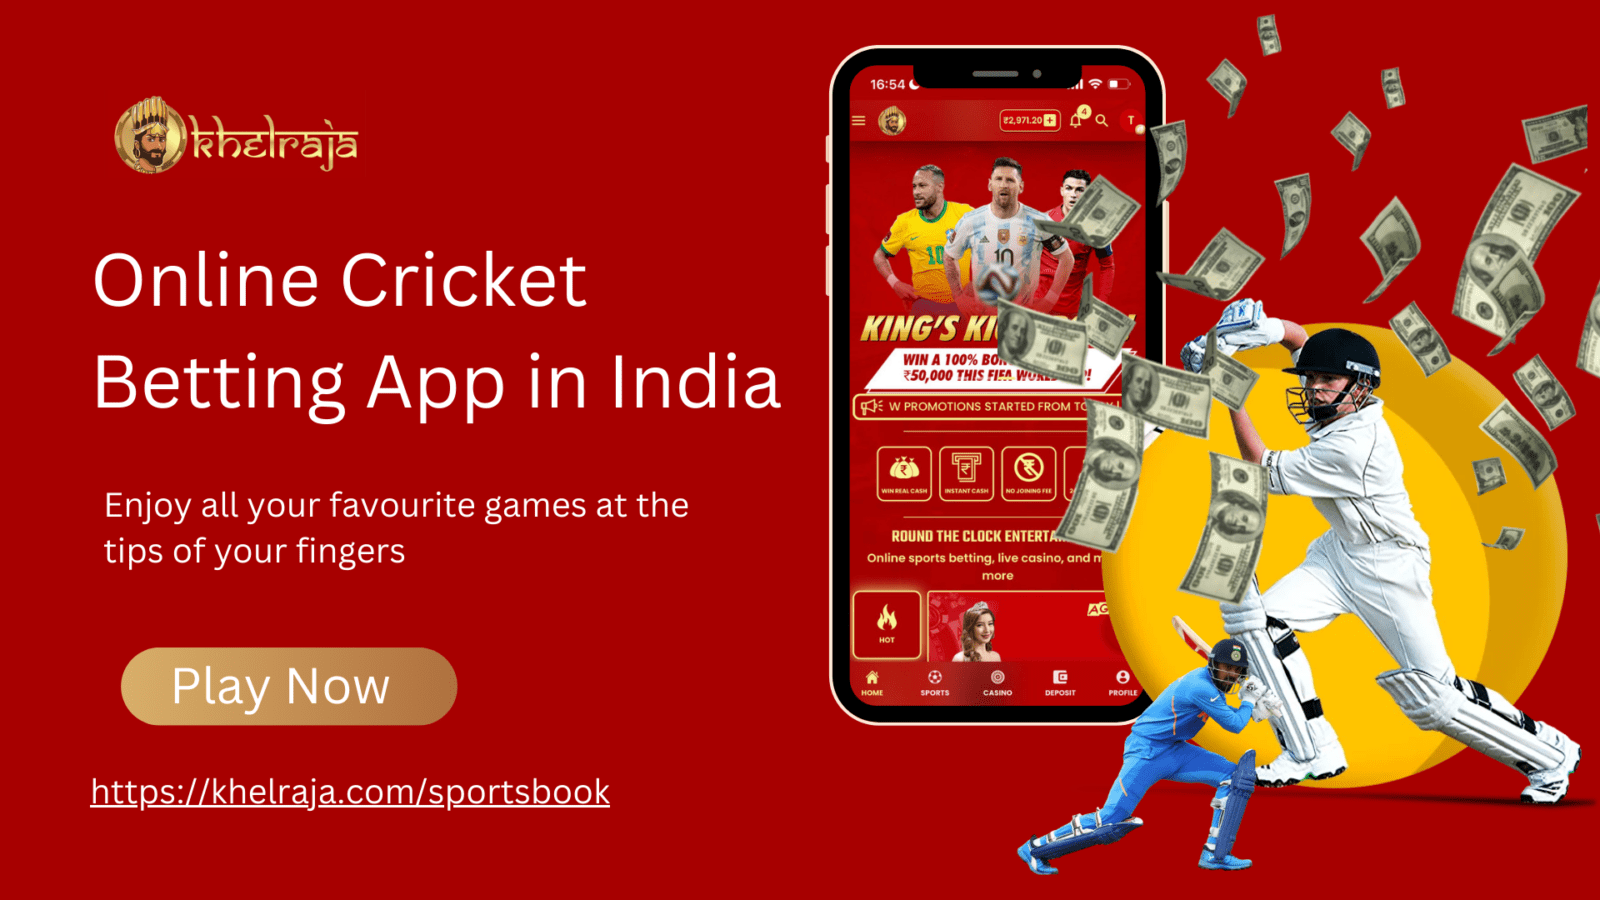 What kinds of real-money rewards could we win using KhelRaja Live Sports Betting App in India?